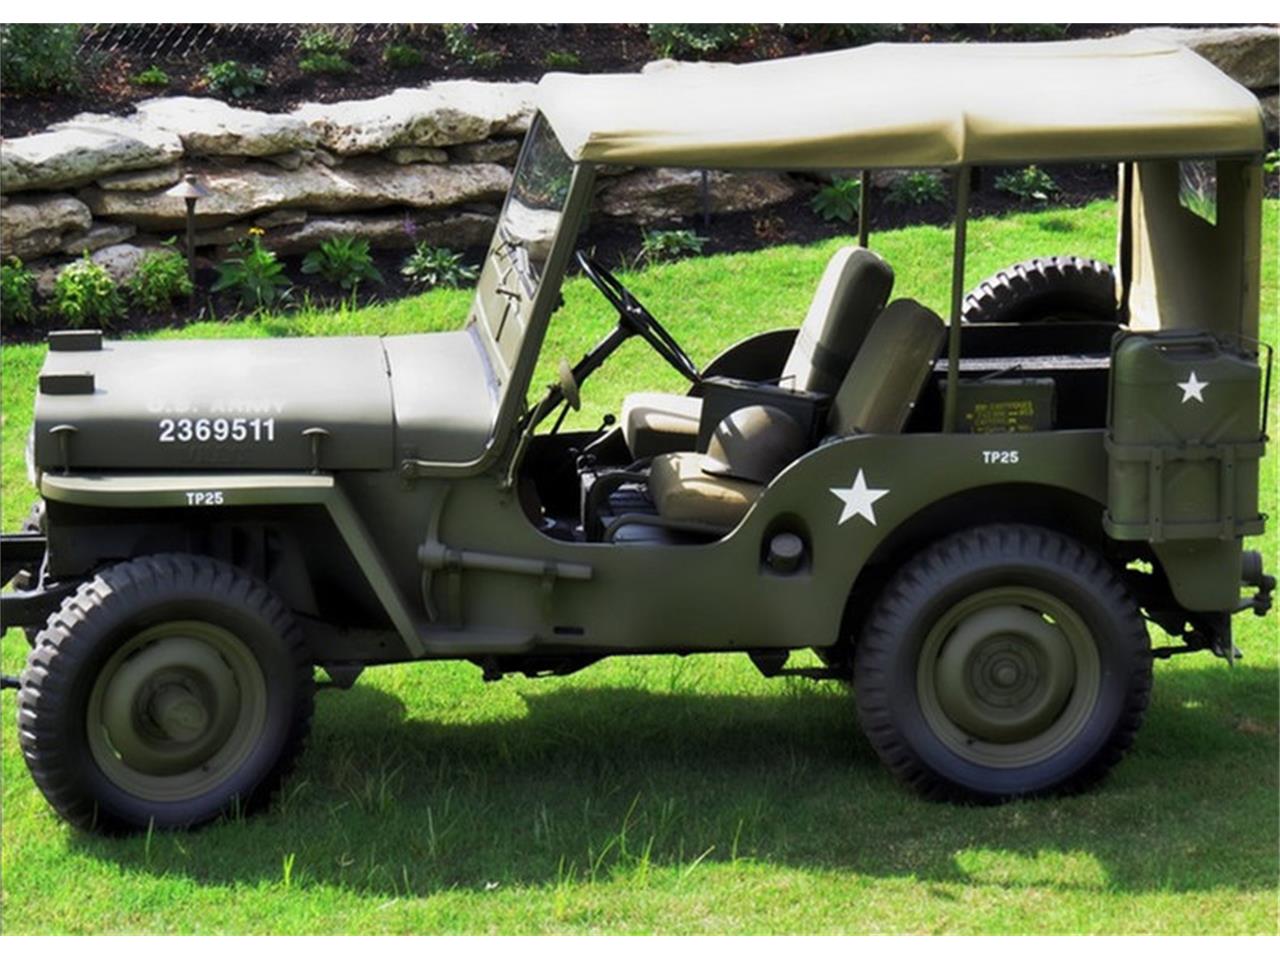 willy jeep models